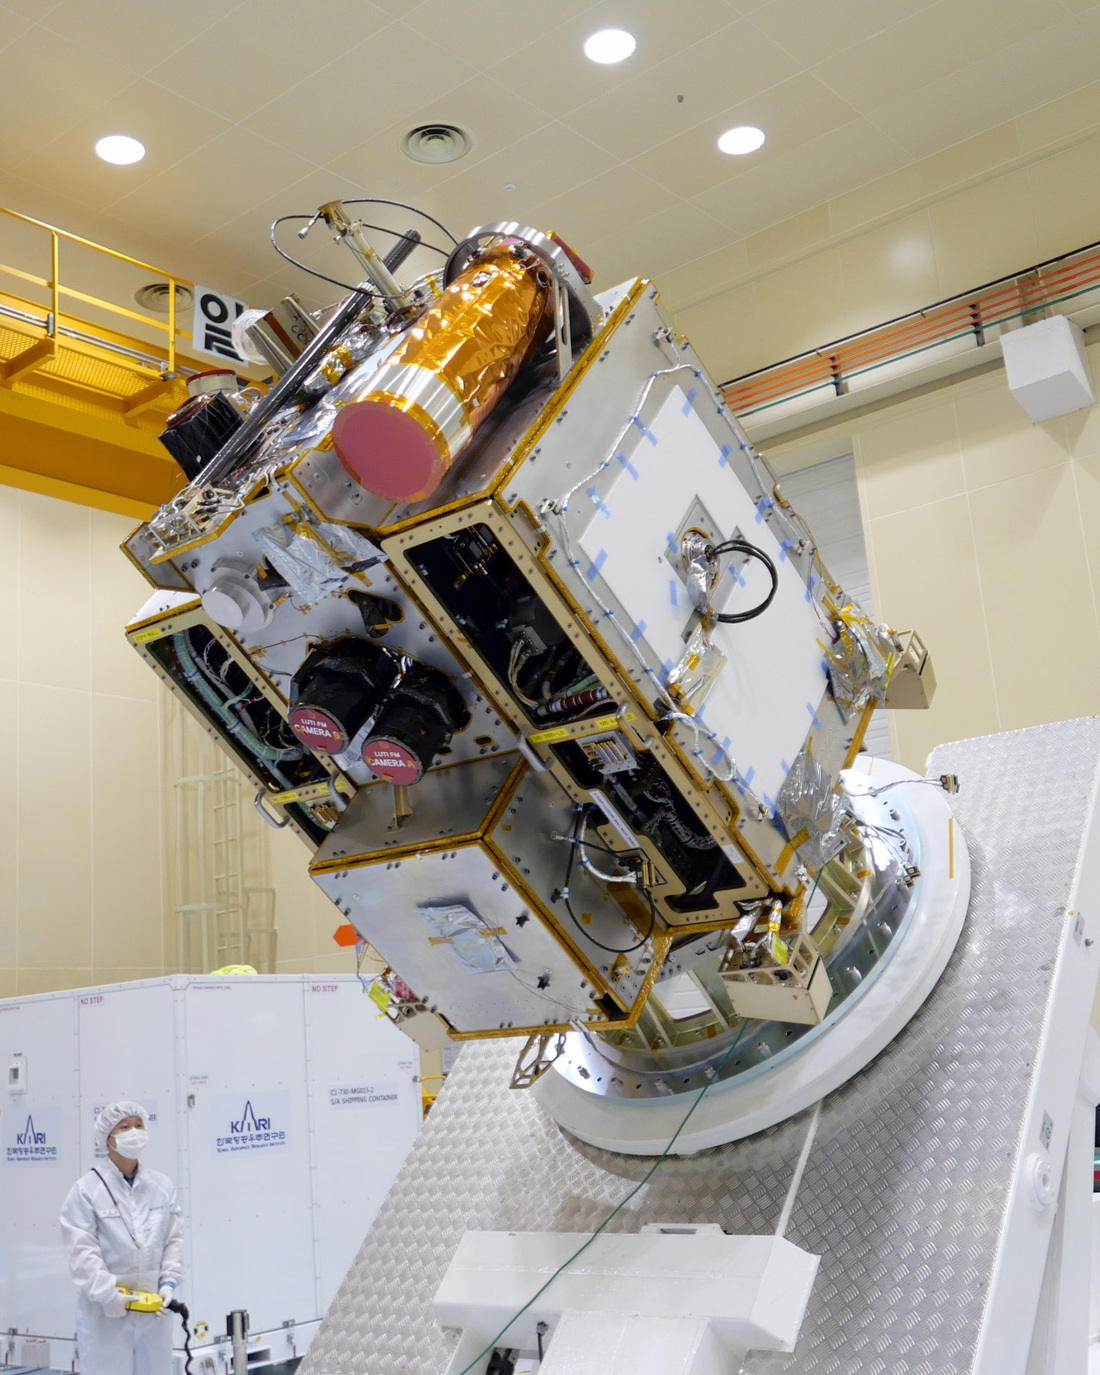 Image of the KPLO satellite being lifted off the floor by its mounting ring at KARI.